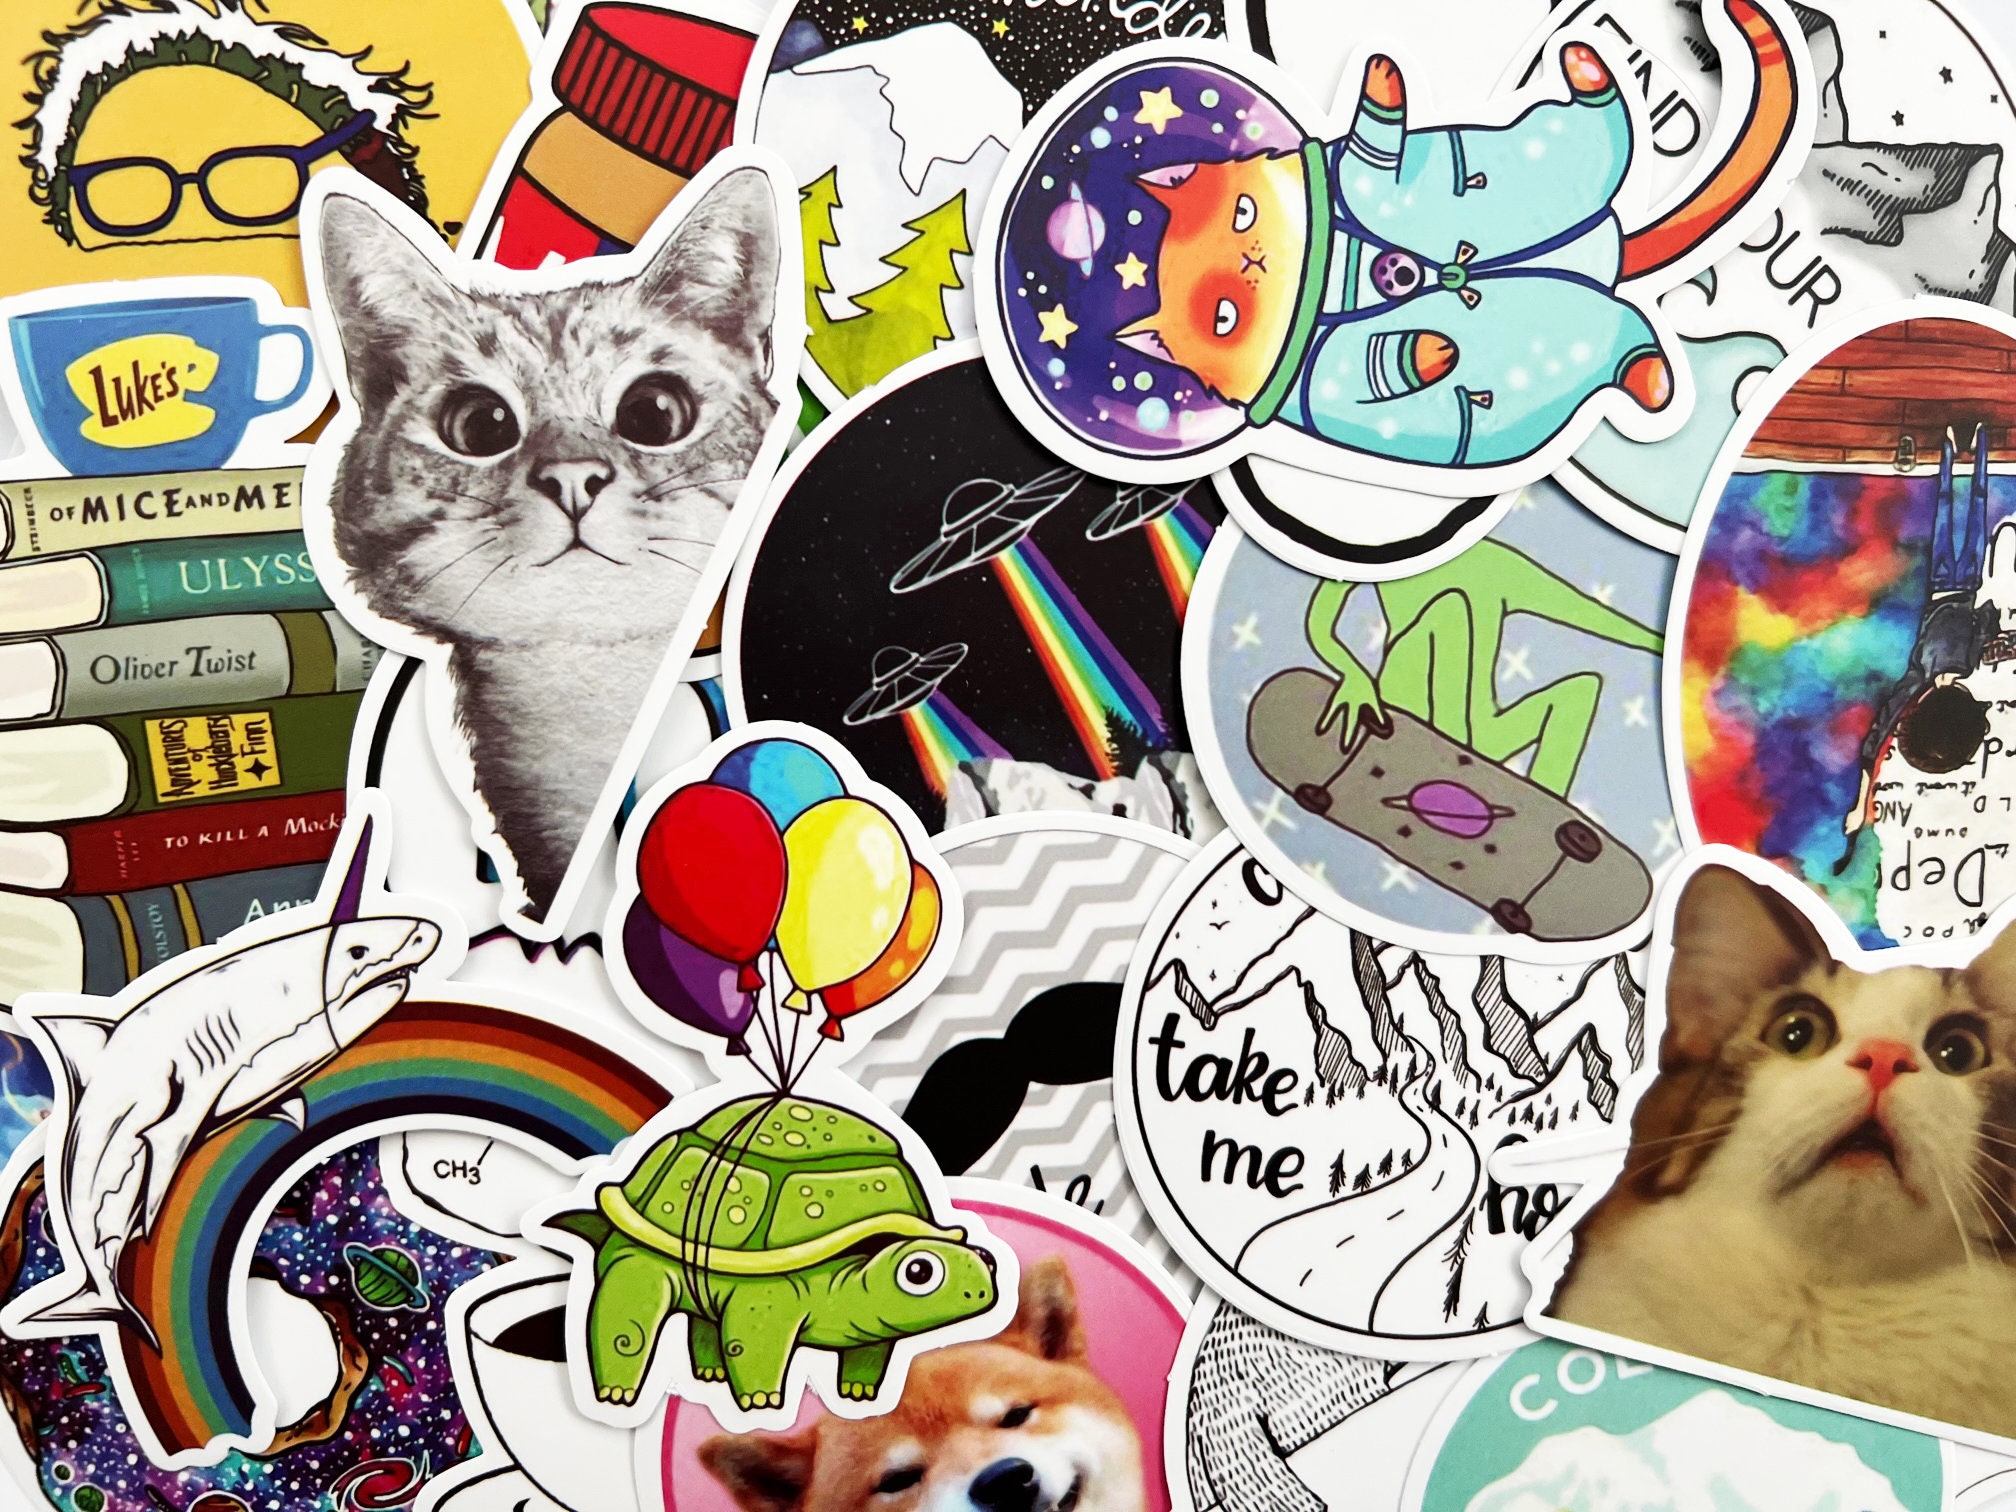 Laptop Stickers to Match Your Personal Style